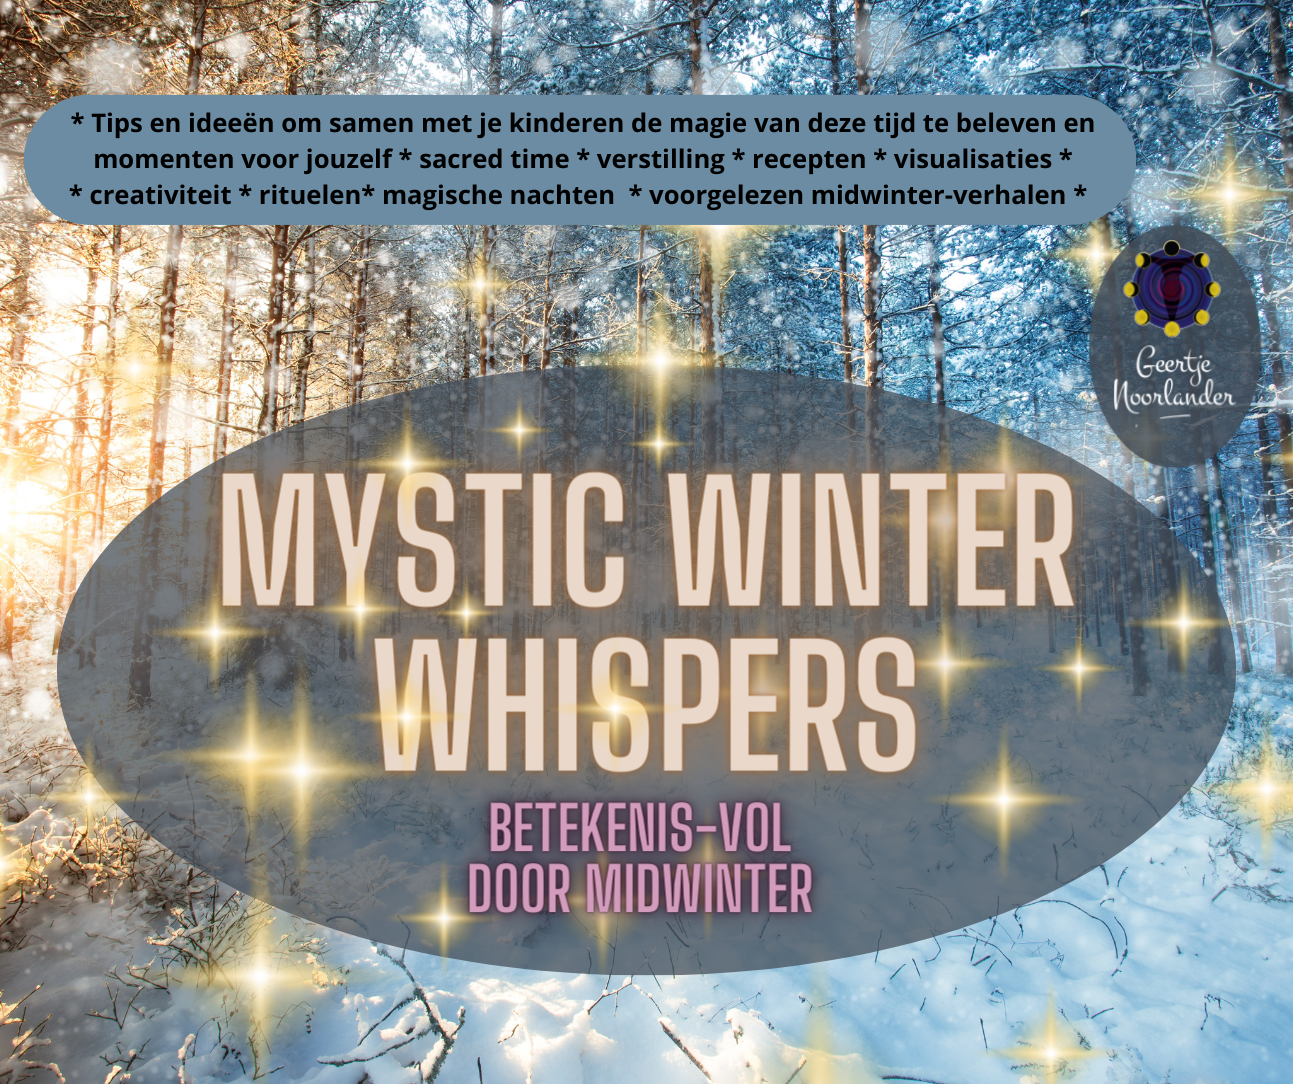 Mystic Winter Whispers